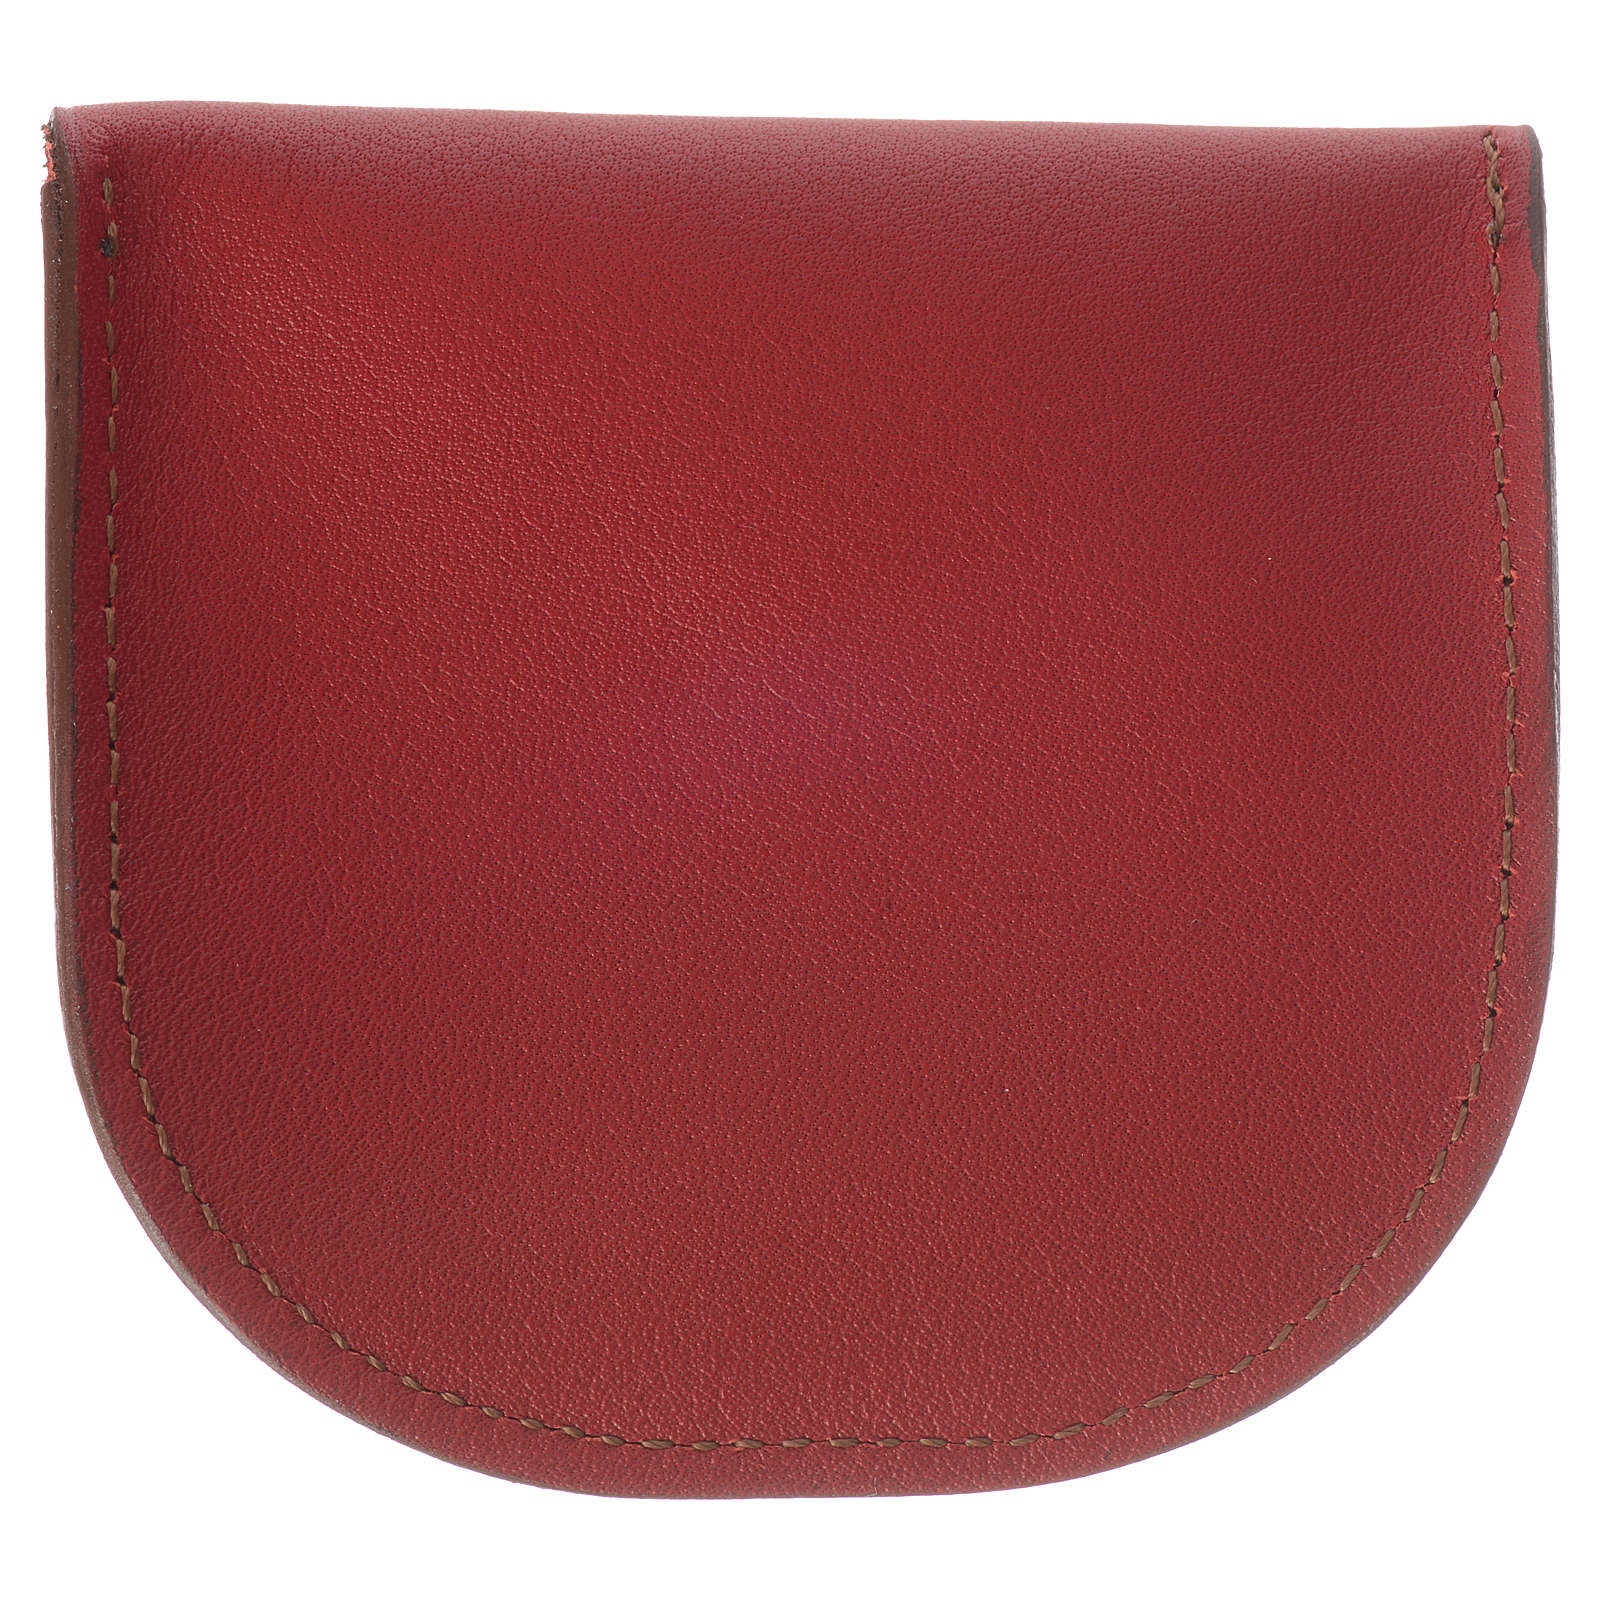 Rosary beads case in red leather, Monks of Bethlèem | online sales on ...